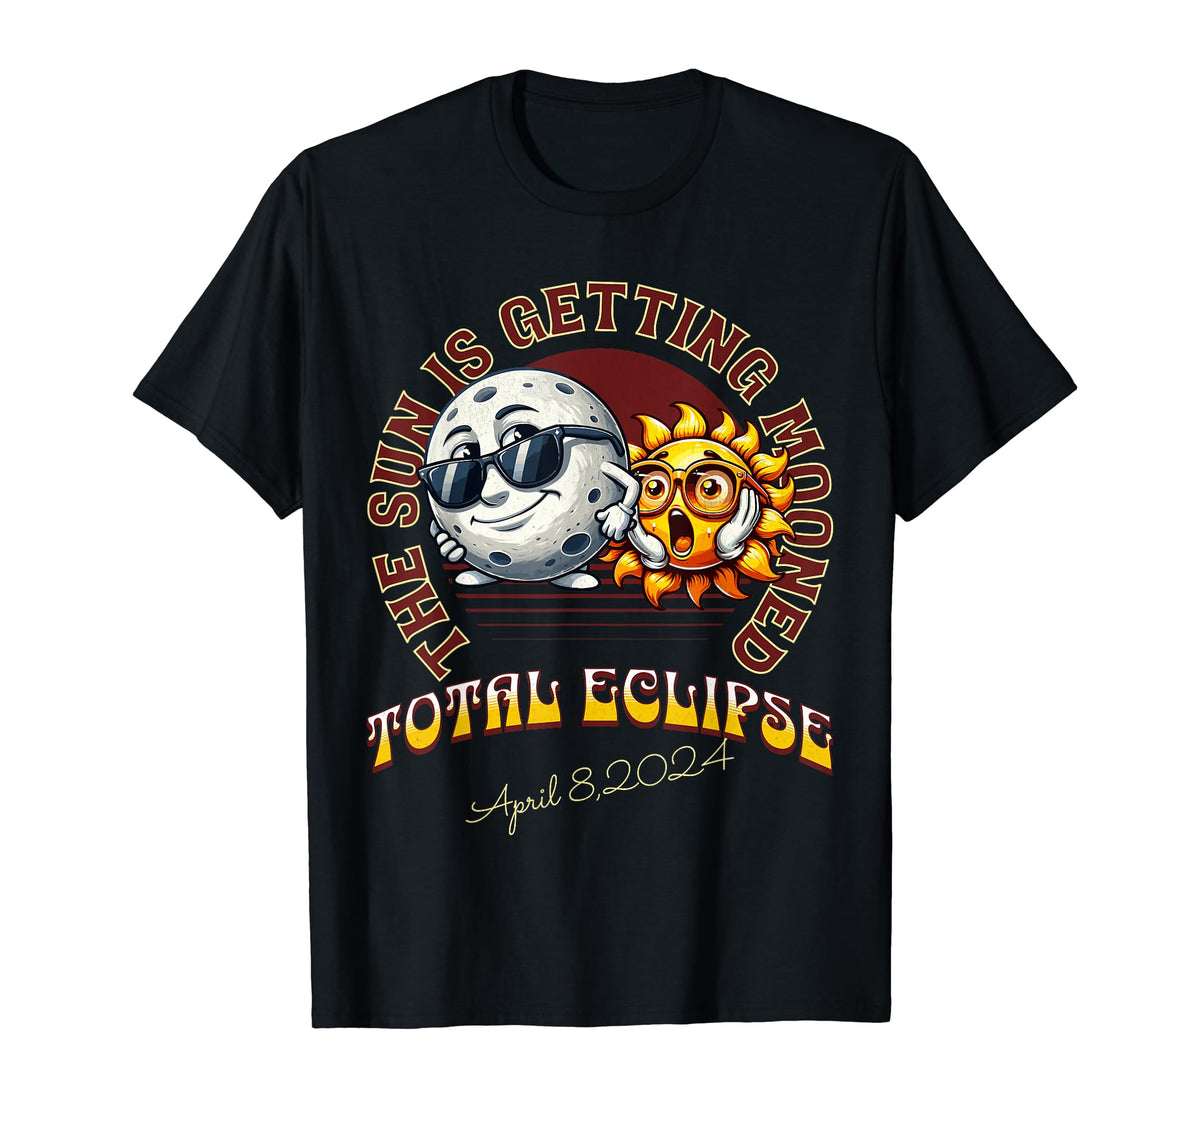 Total Solar Eclipse Chase 2024 Sun is Getting Mooned T-Shirt